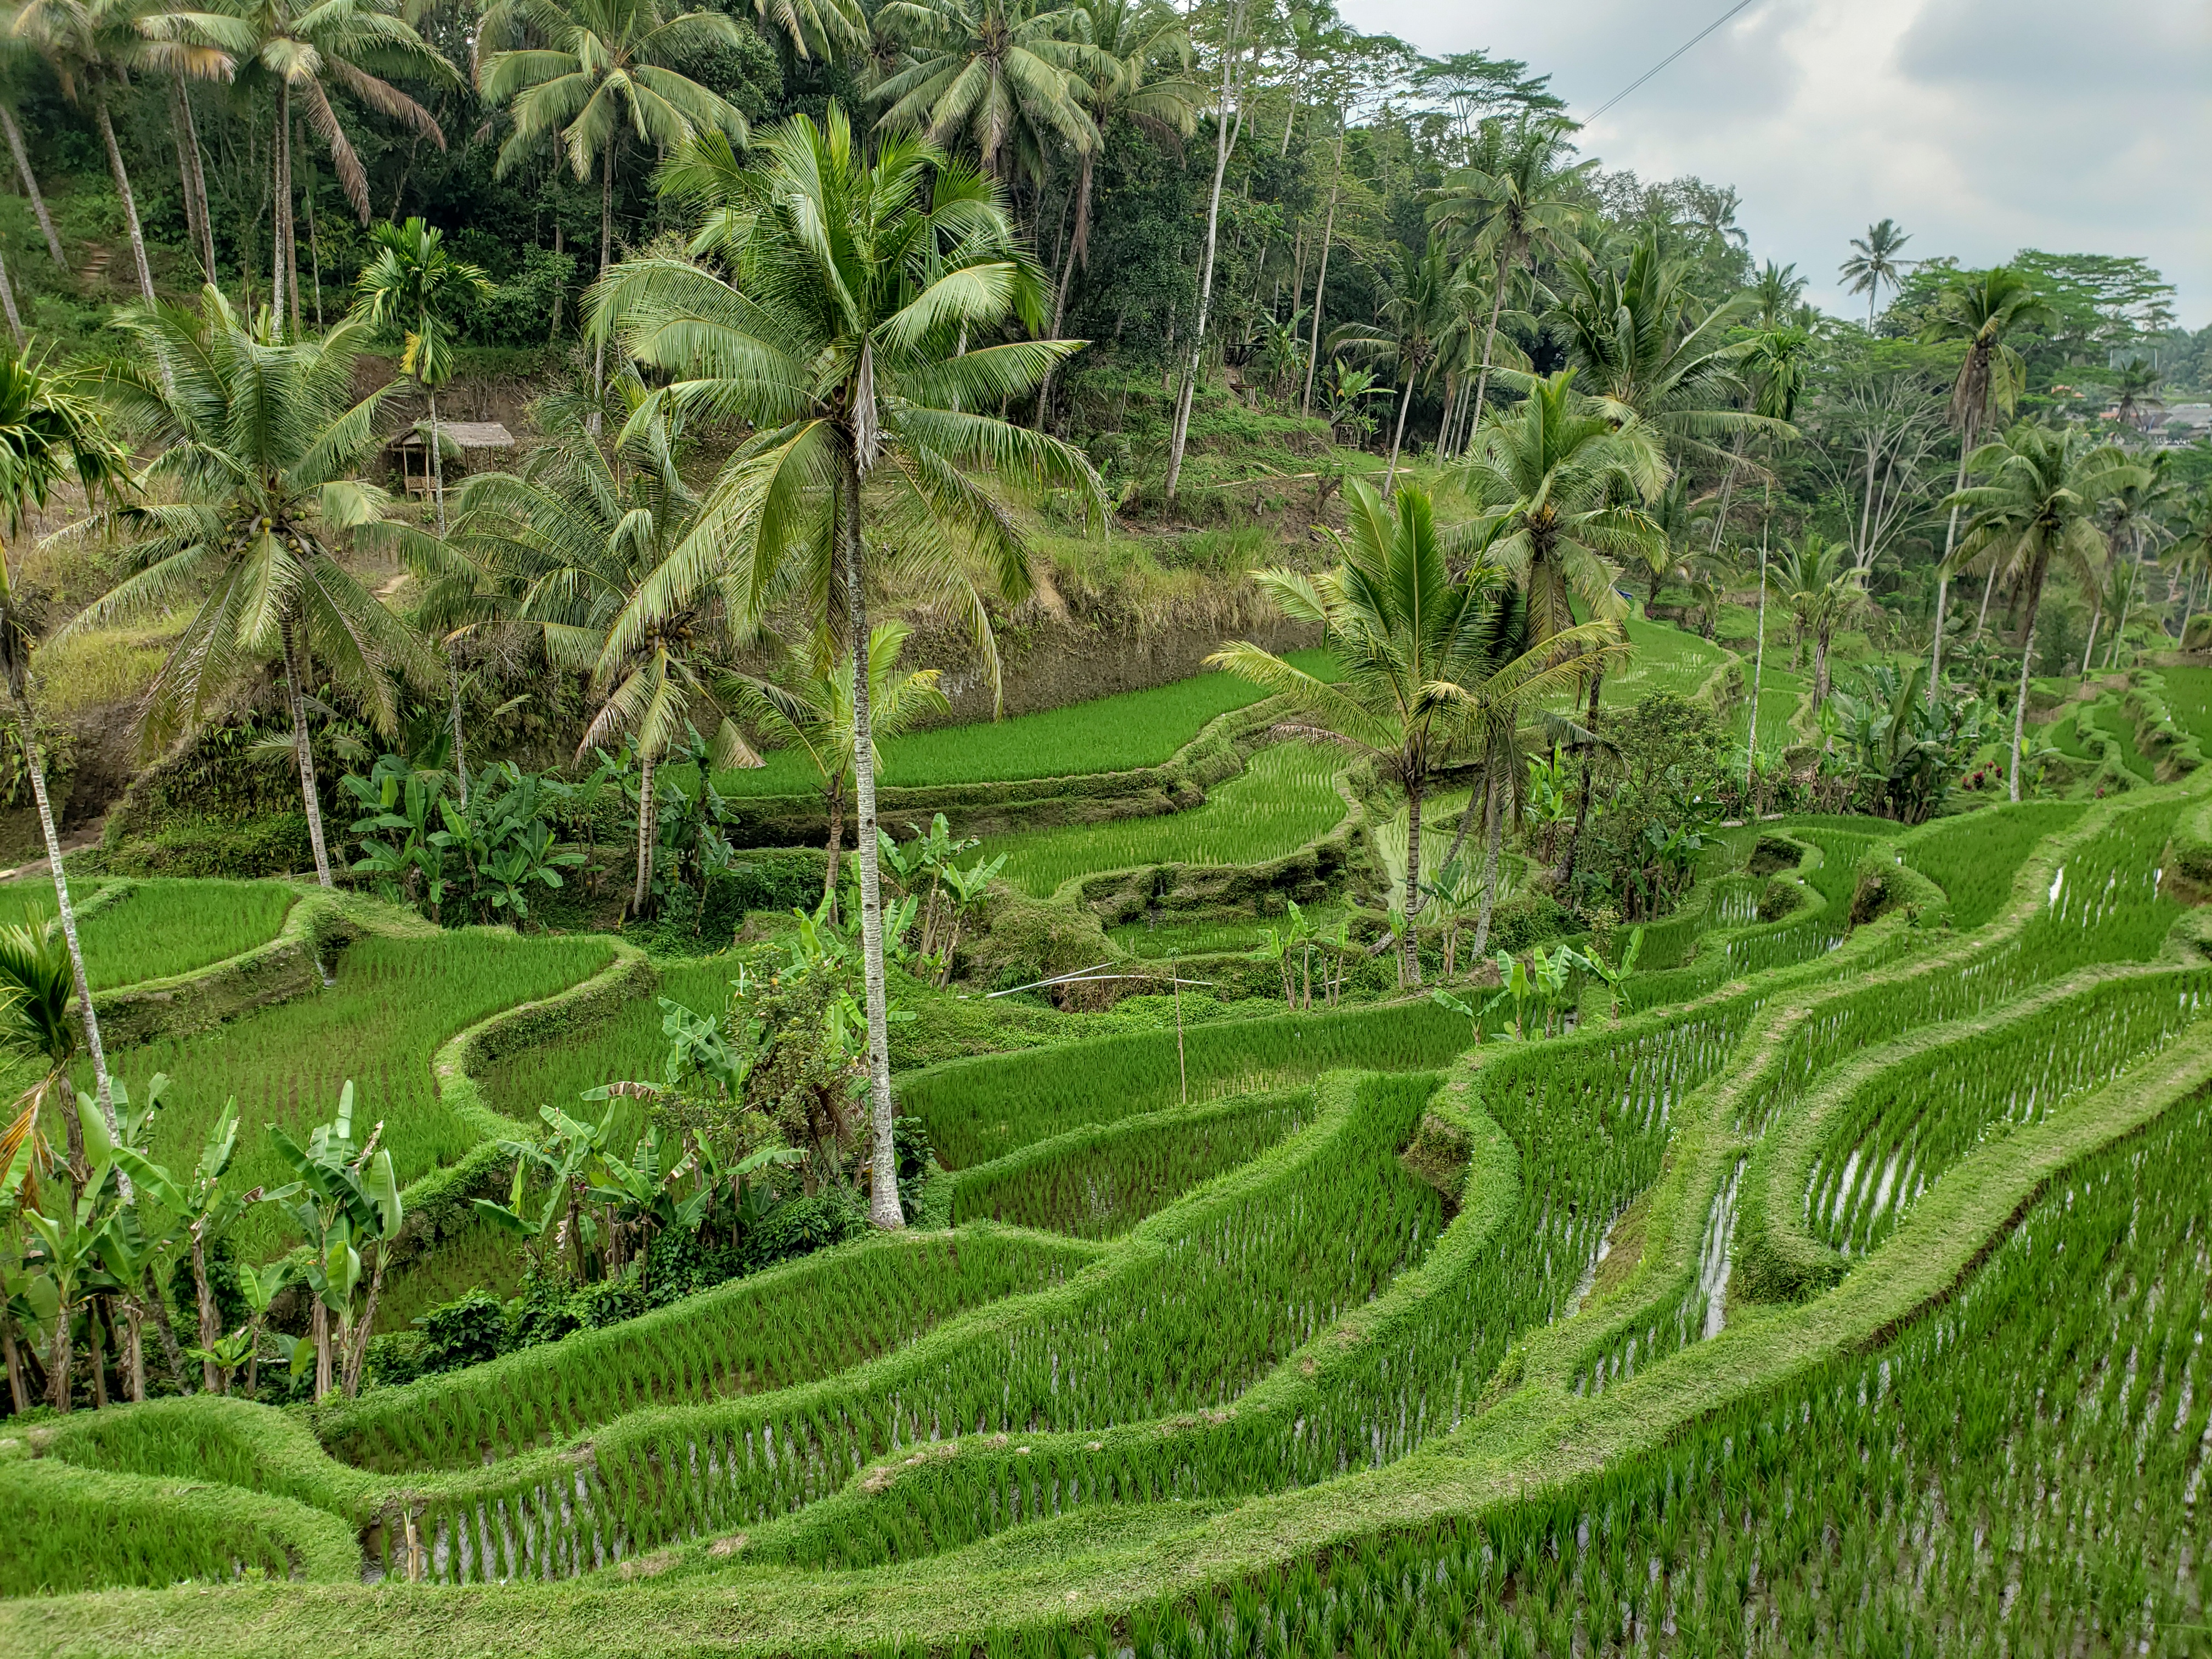 Places in Bali Overcrowded with Tourists (& Better Alternatives to Consider)